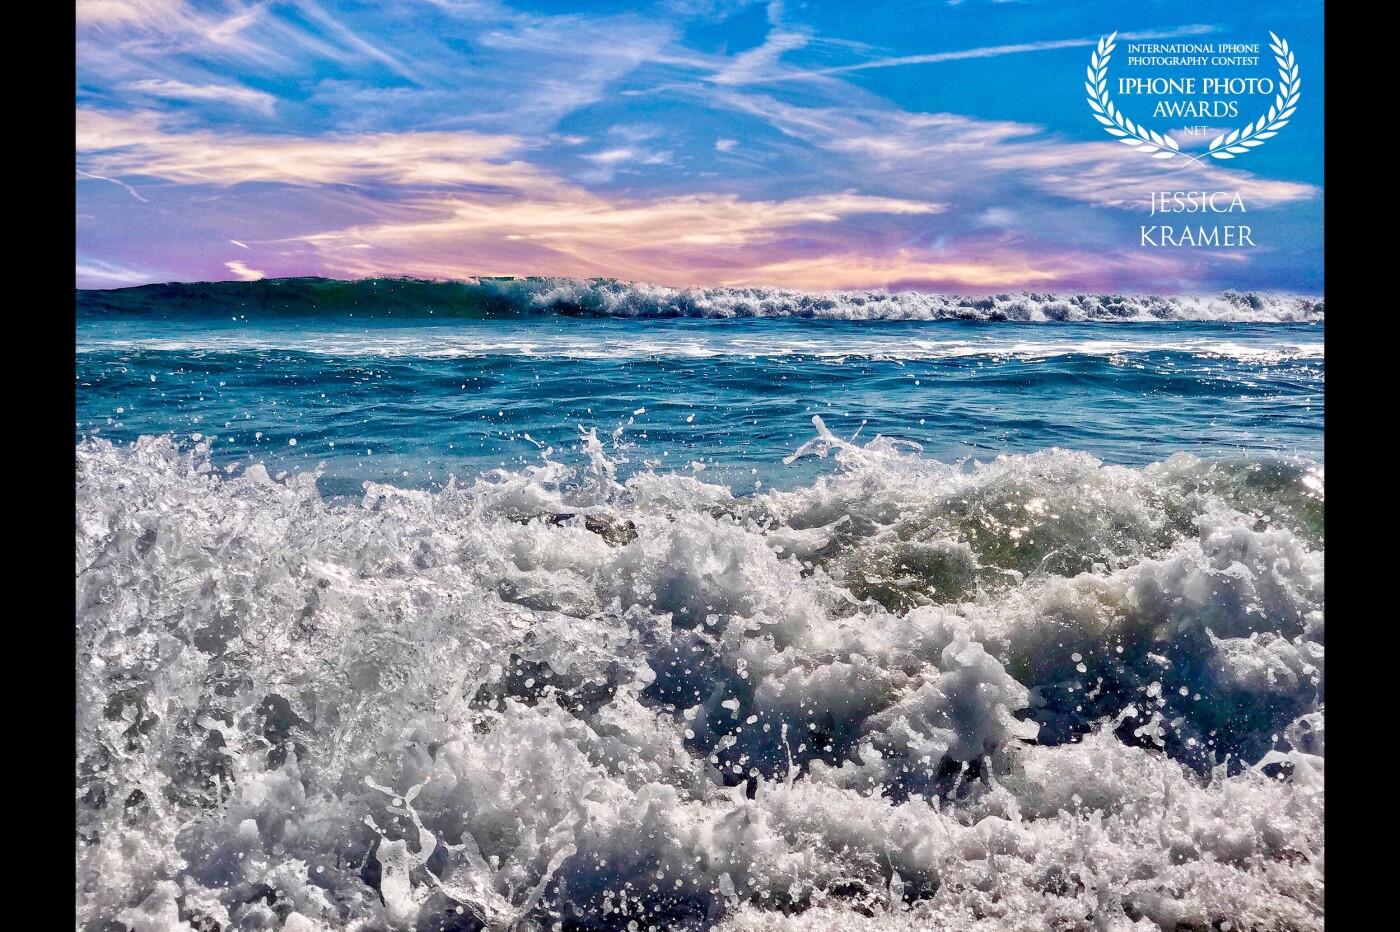 “To sit in silence at the shore, watch the waves, and hear the surf, is to appreciate the very breath and heartbeat of the Earth.” <br />
A summer day spent enjoying the beautiful sky and amazing ocean waves at my favorite local beach, Venice Beach, California. 